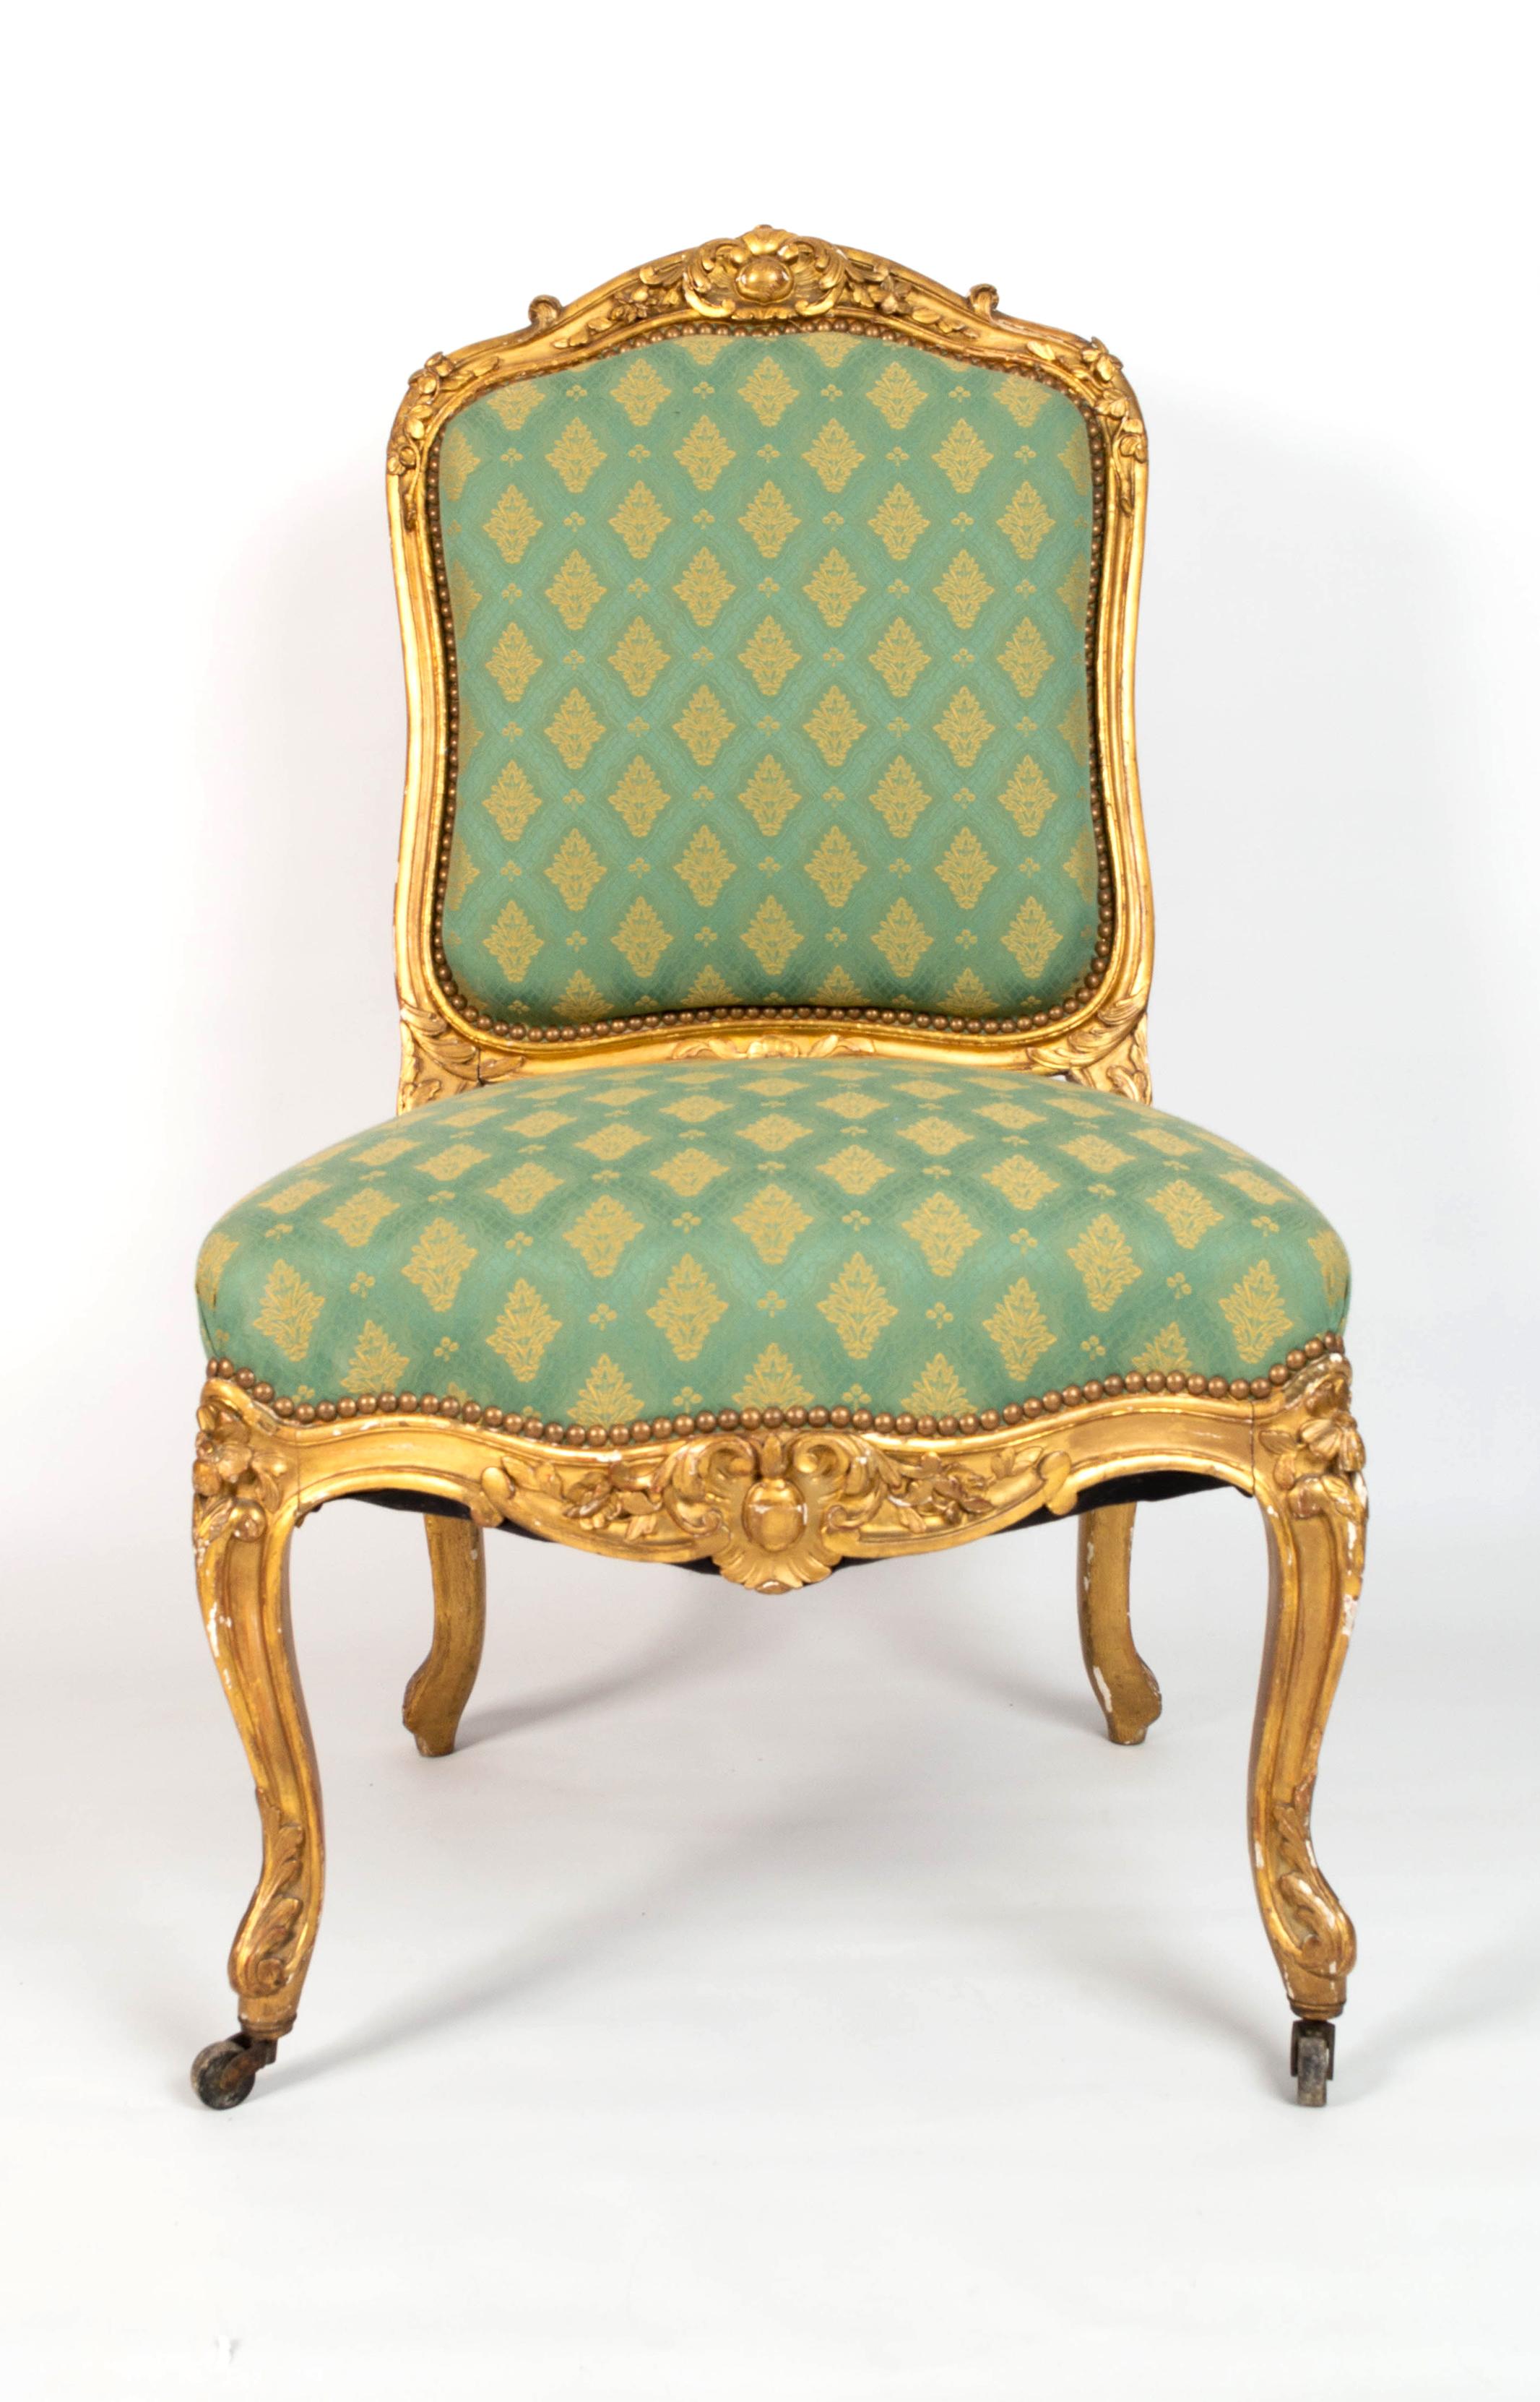 Pair Antique French 19th Century Louis XV Style Giltwood Salon Chairs C.1870 For Sale 8